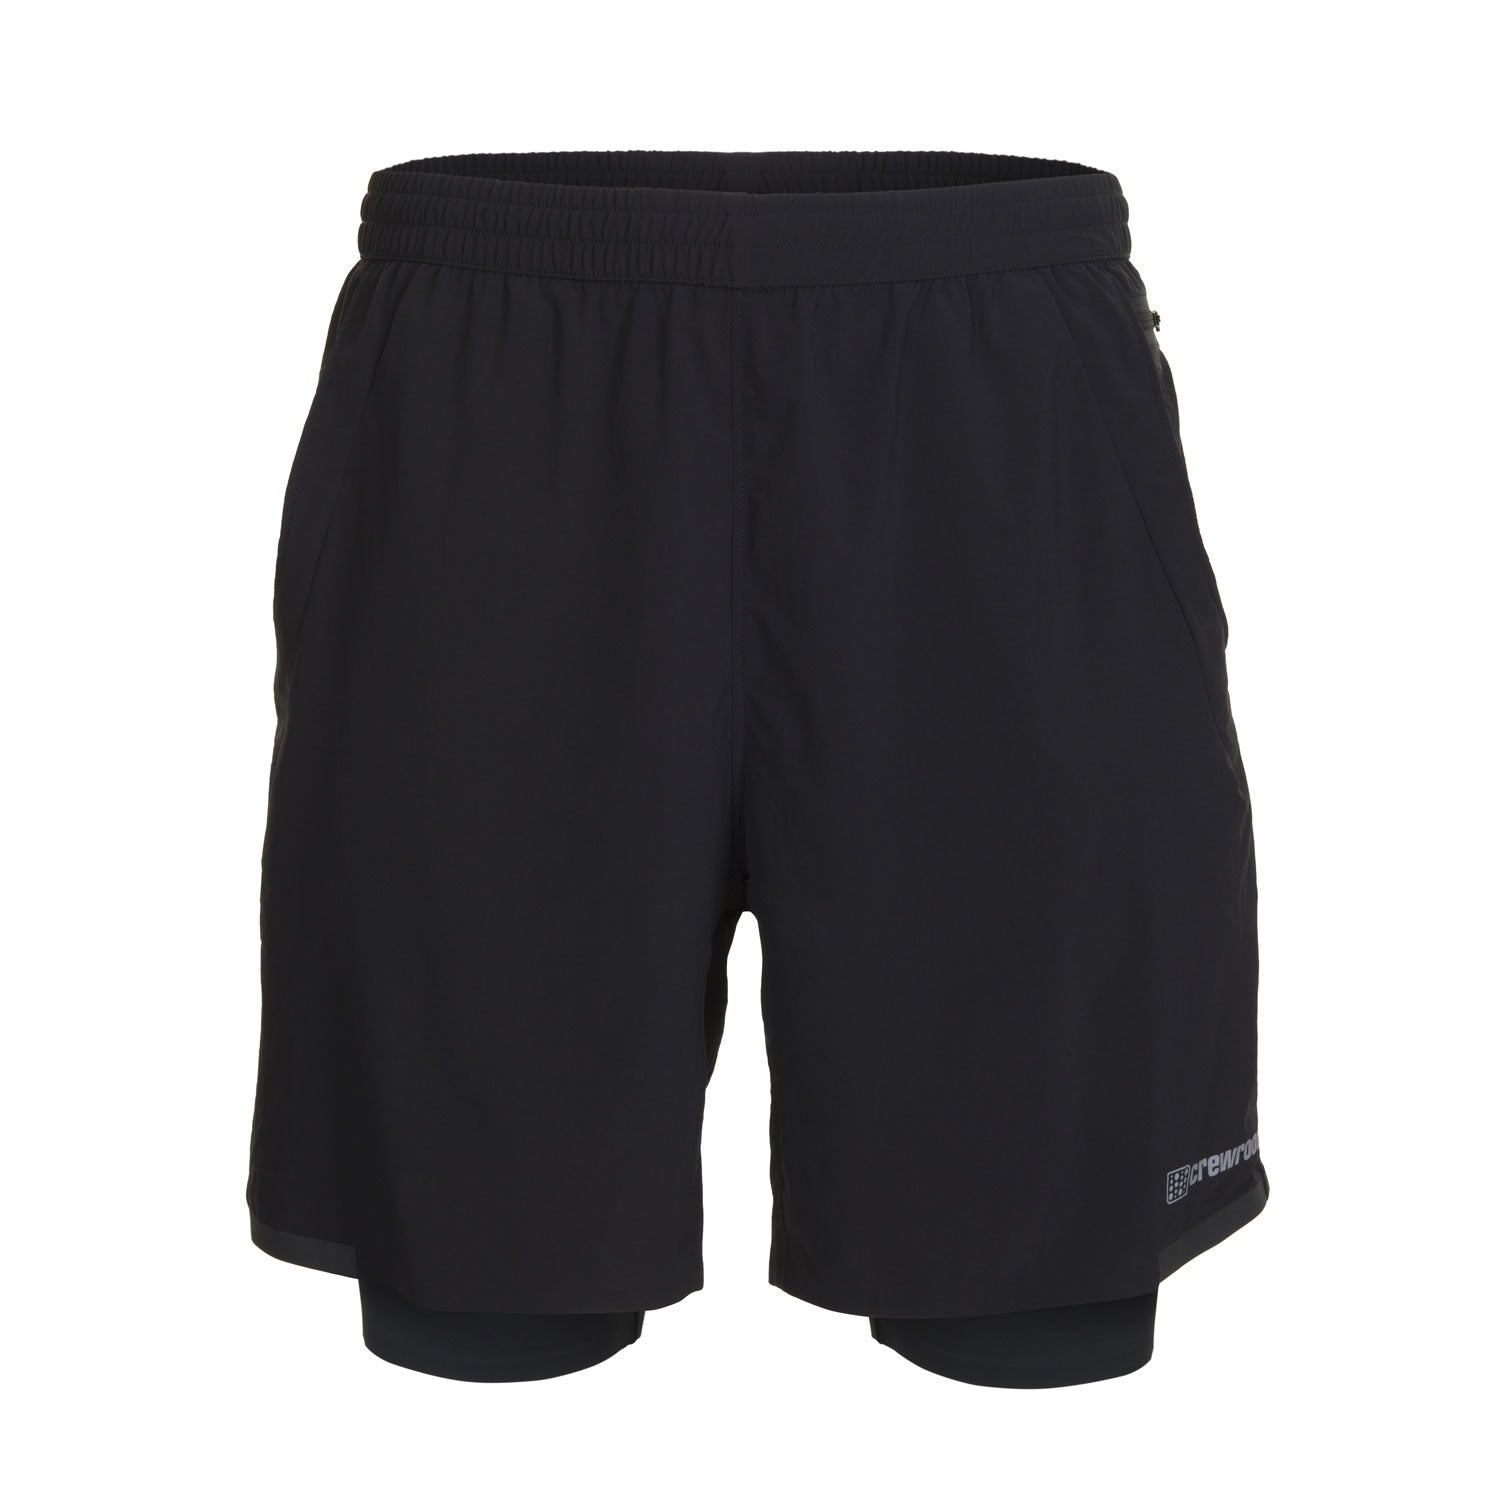 The 2-in-1 Fast Track Short 7" (Men's)